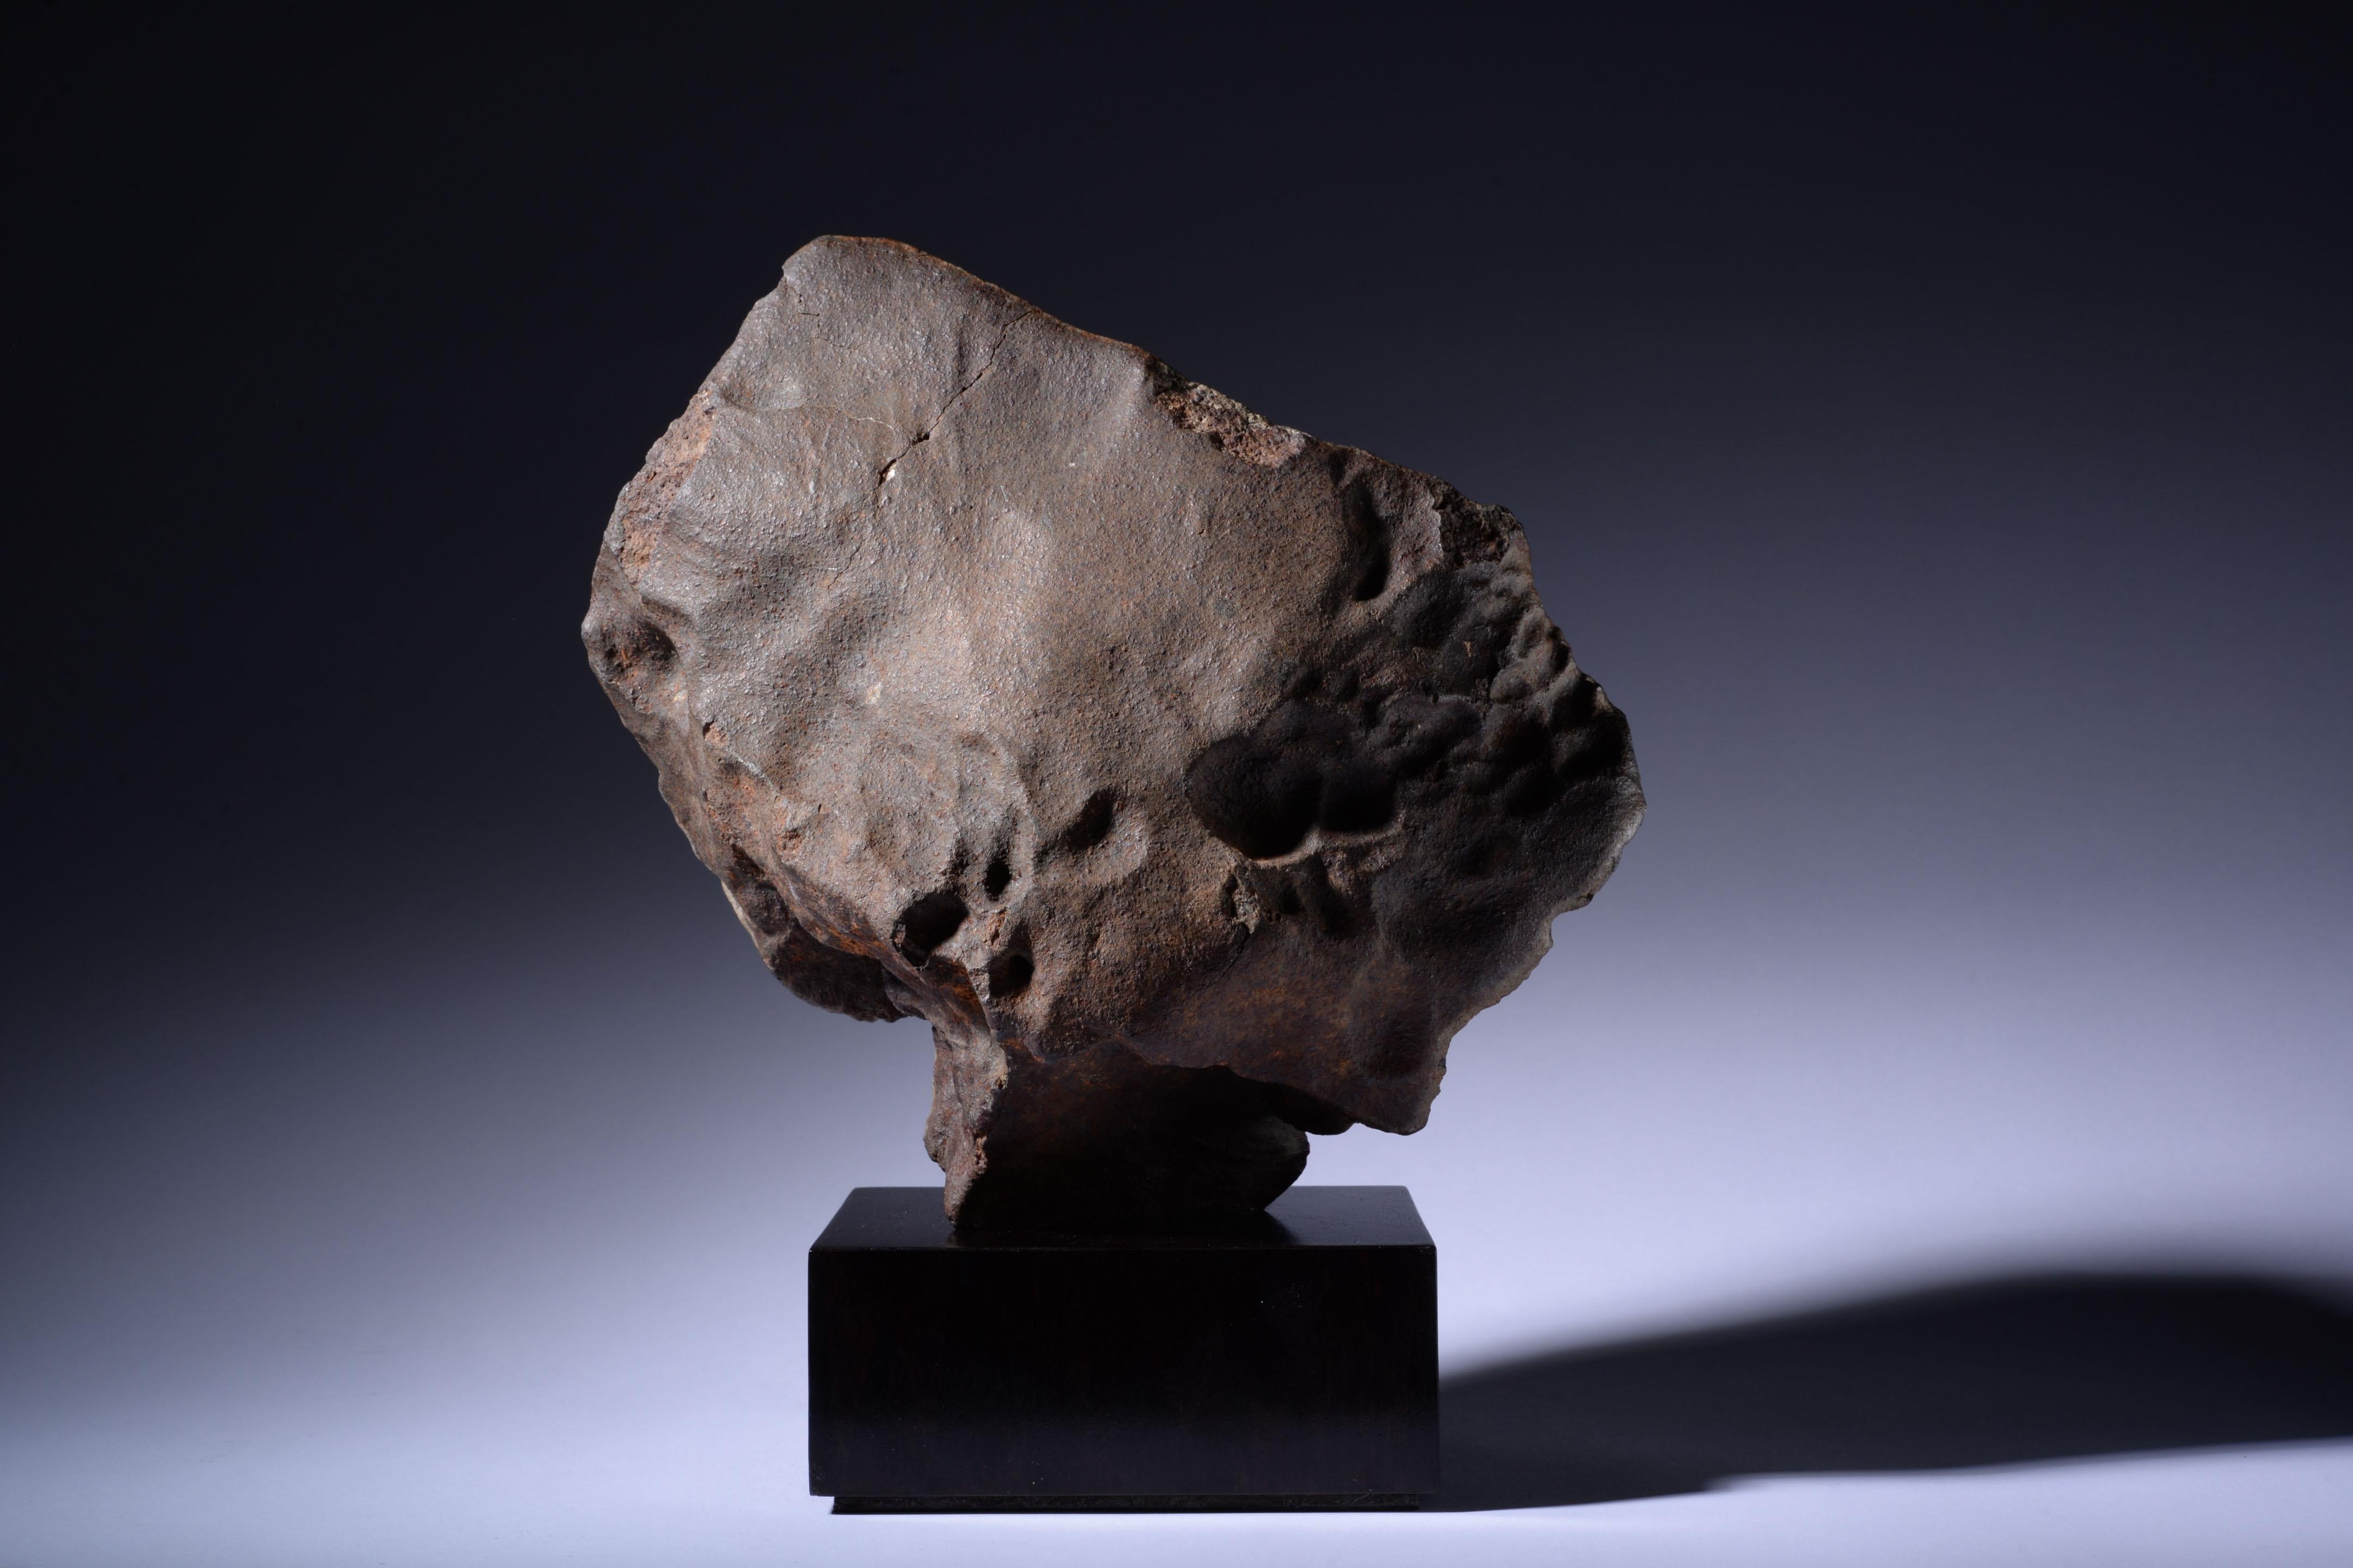 Oriented Chondrite Meteorite Circa 4.56 Billion y/o
Chondrite
24 x 20 cm, 28 cm tall on base
7.1 kg

A sculptural and beautifully weathered chondrite meteorite; upon entering the atmosphere, this extraterrestrial stone would have heated the